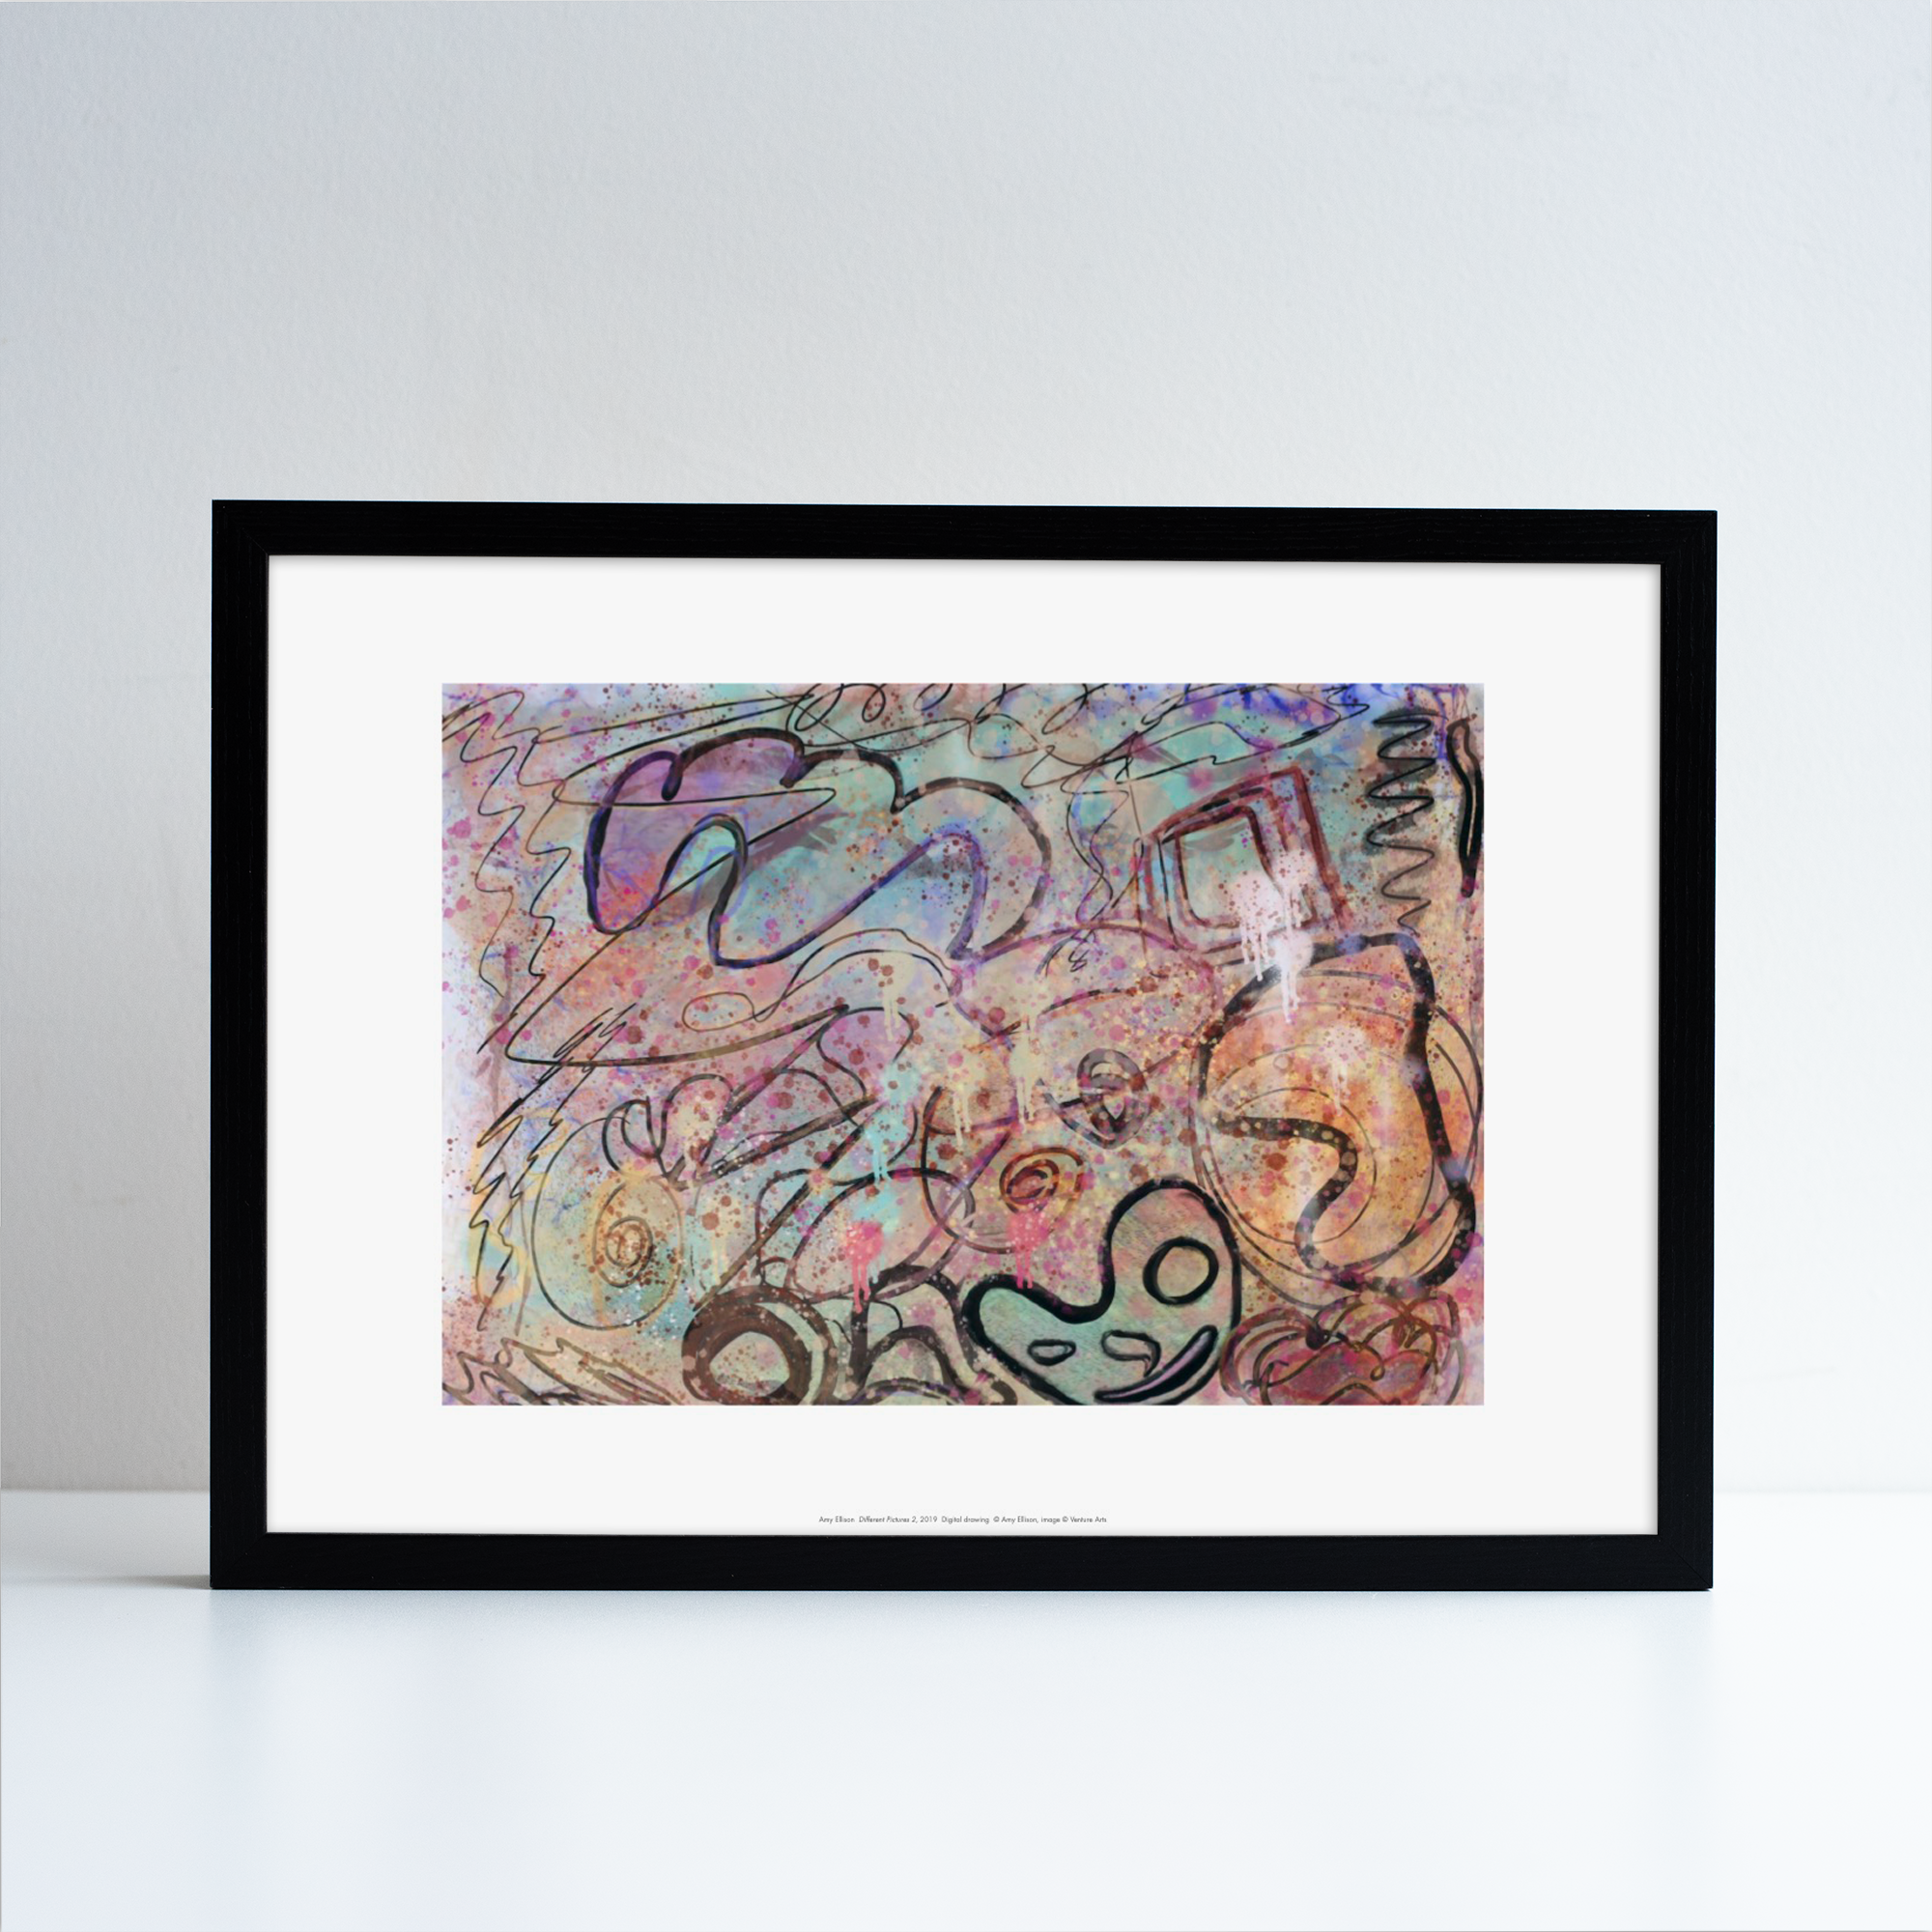 Framed reproduction of abstract work by Amy Ellison titled Different Pictures